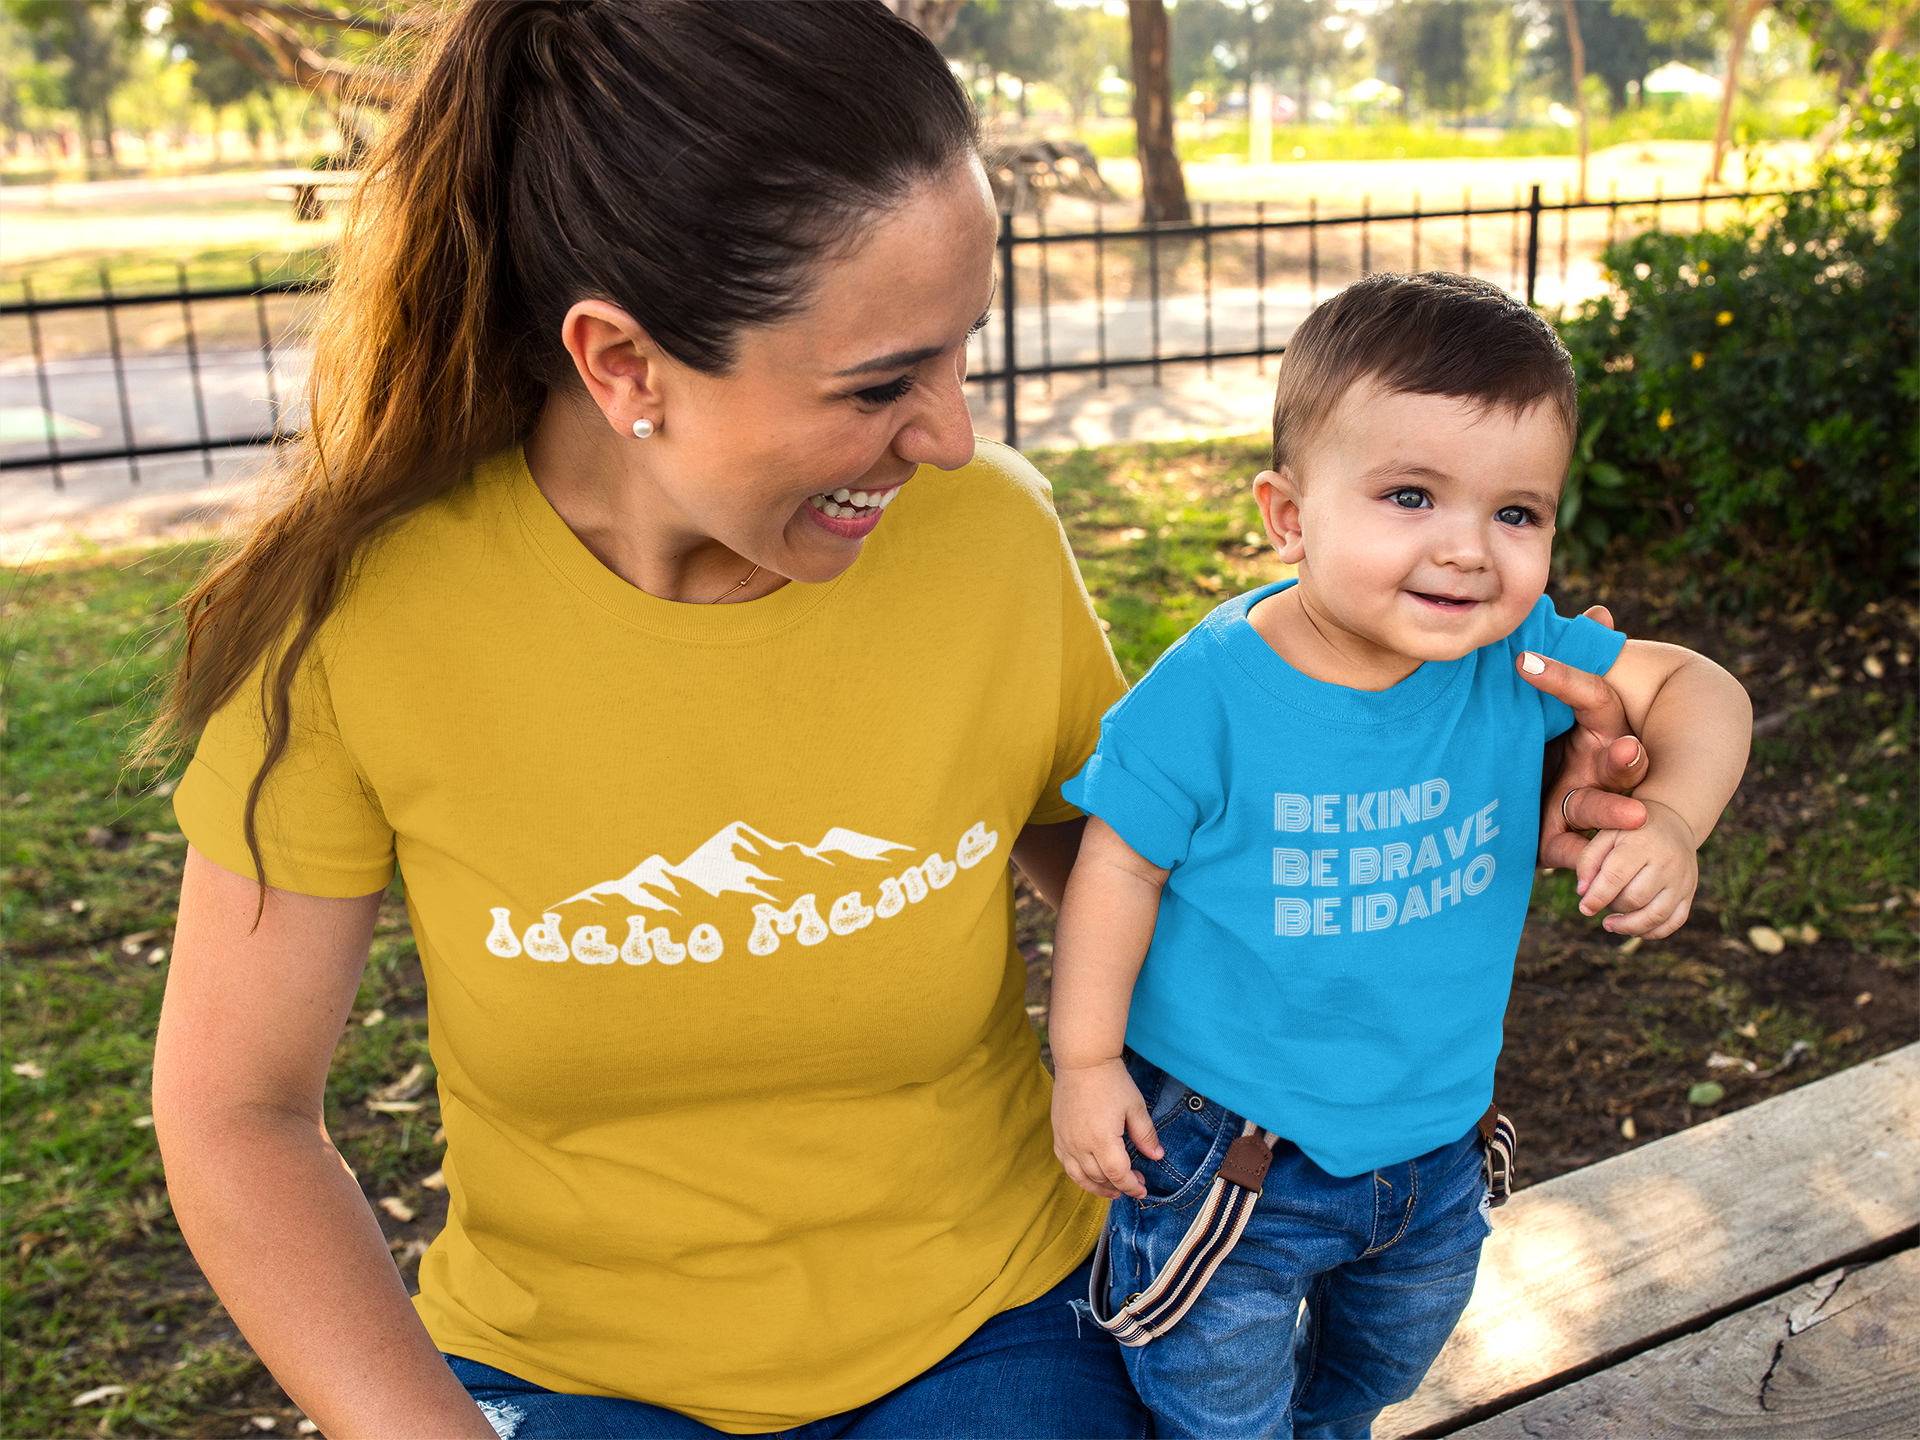 This Idaho Mama T shirt is a must for any Idaho mom, the new mom, the grandma, it's a shirt that fits all women. It comes in multiple colors. This Idaho T shirt has Idaho Mama written on the front with Idaho mountains above it. It can be dressed up or dressed down. 